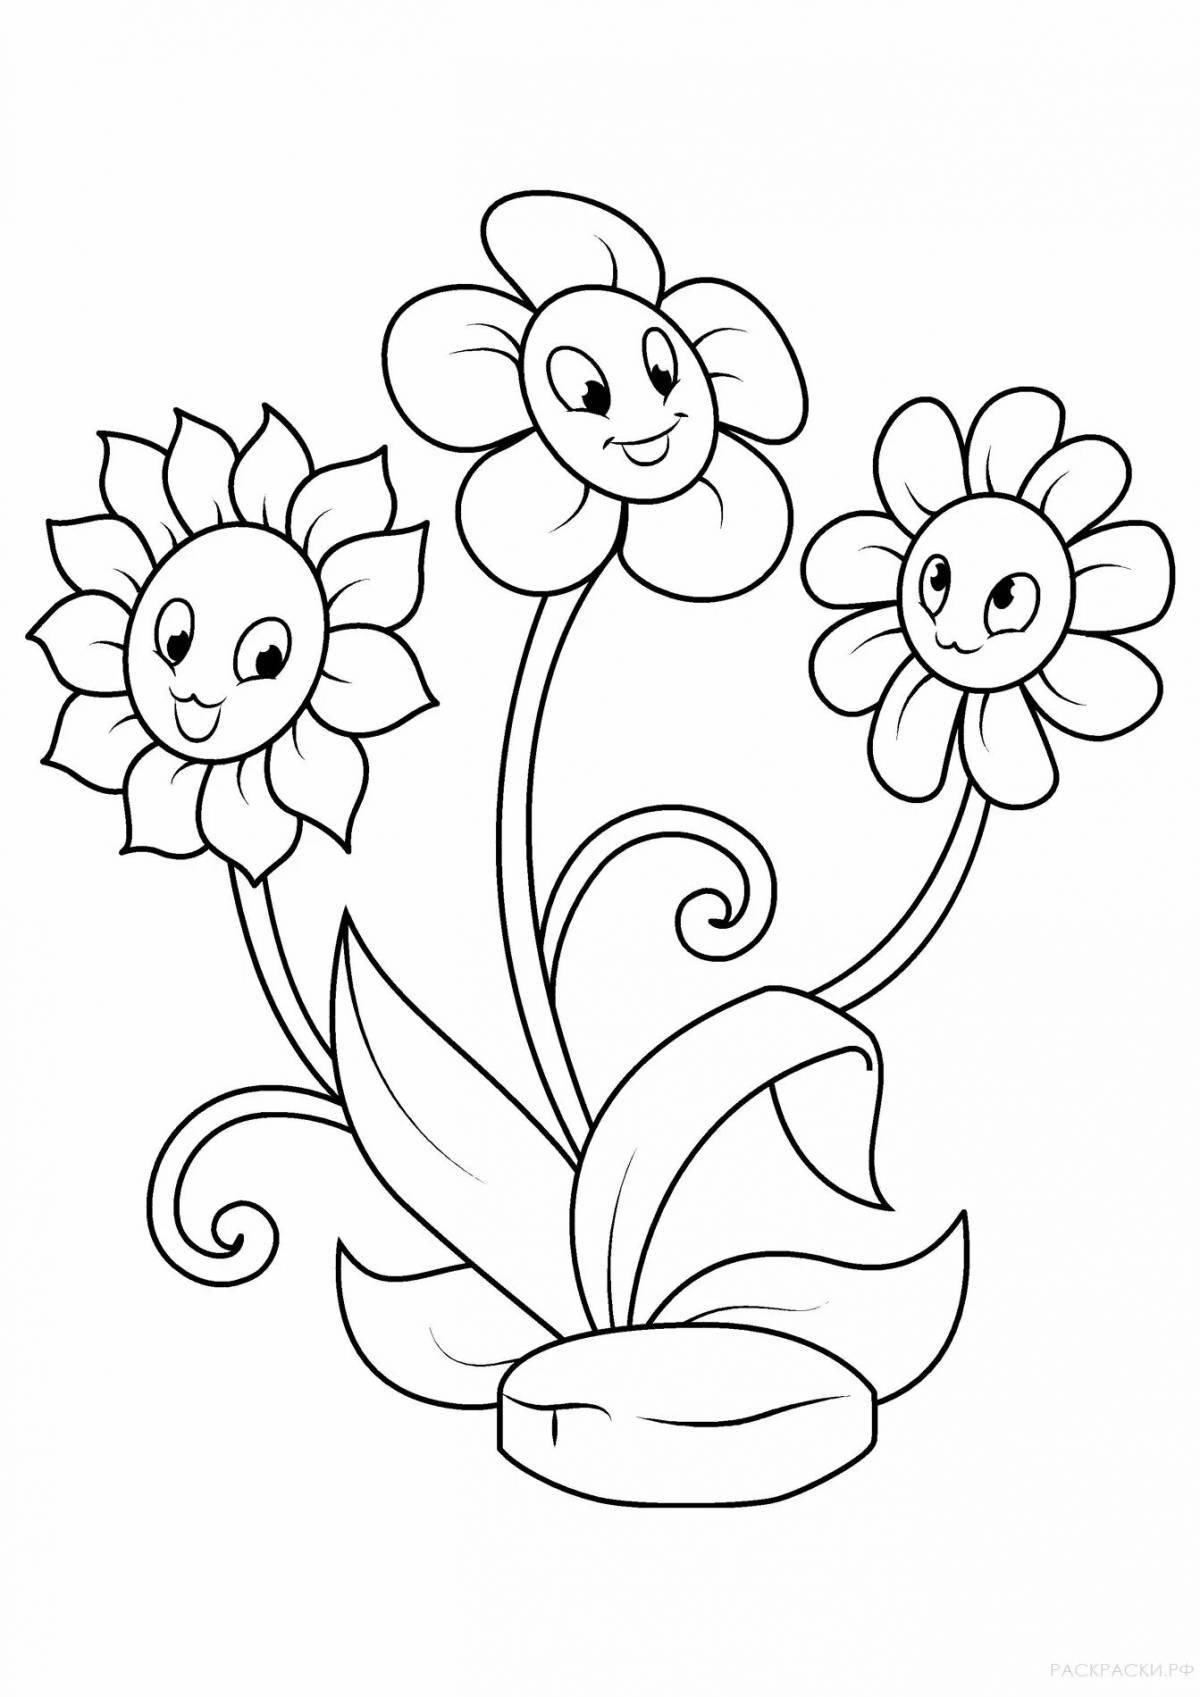 Gorgeous flower coloring book for 4-5 year olds